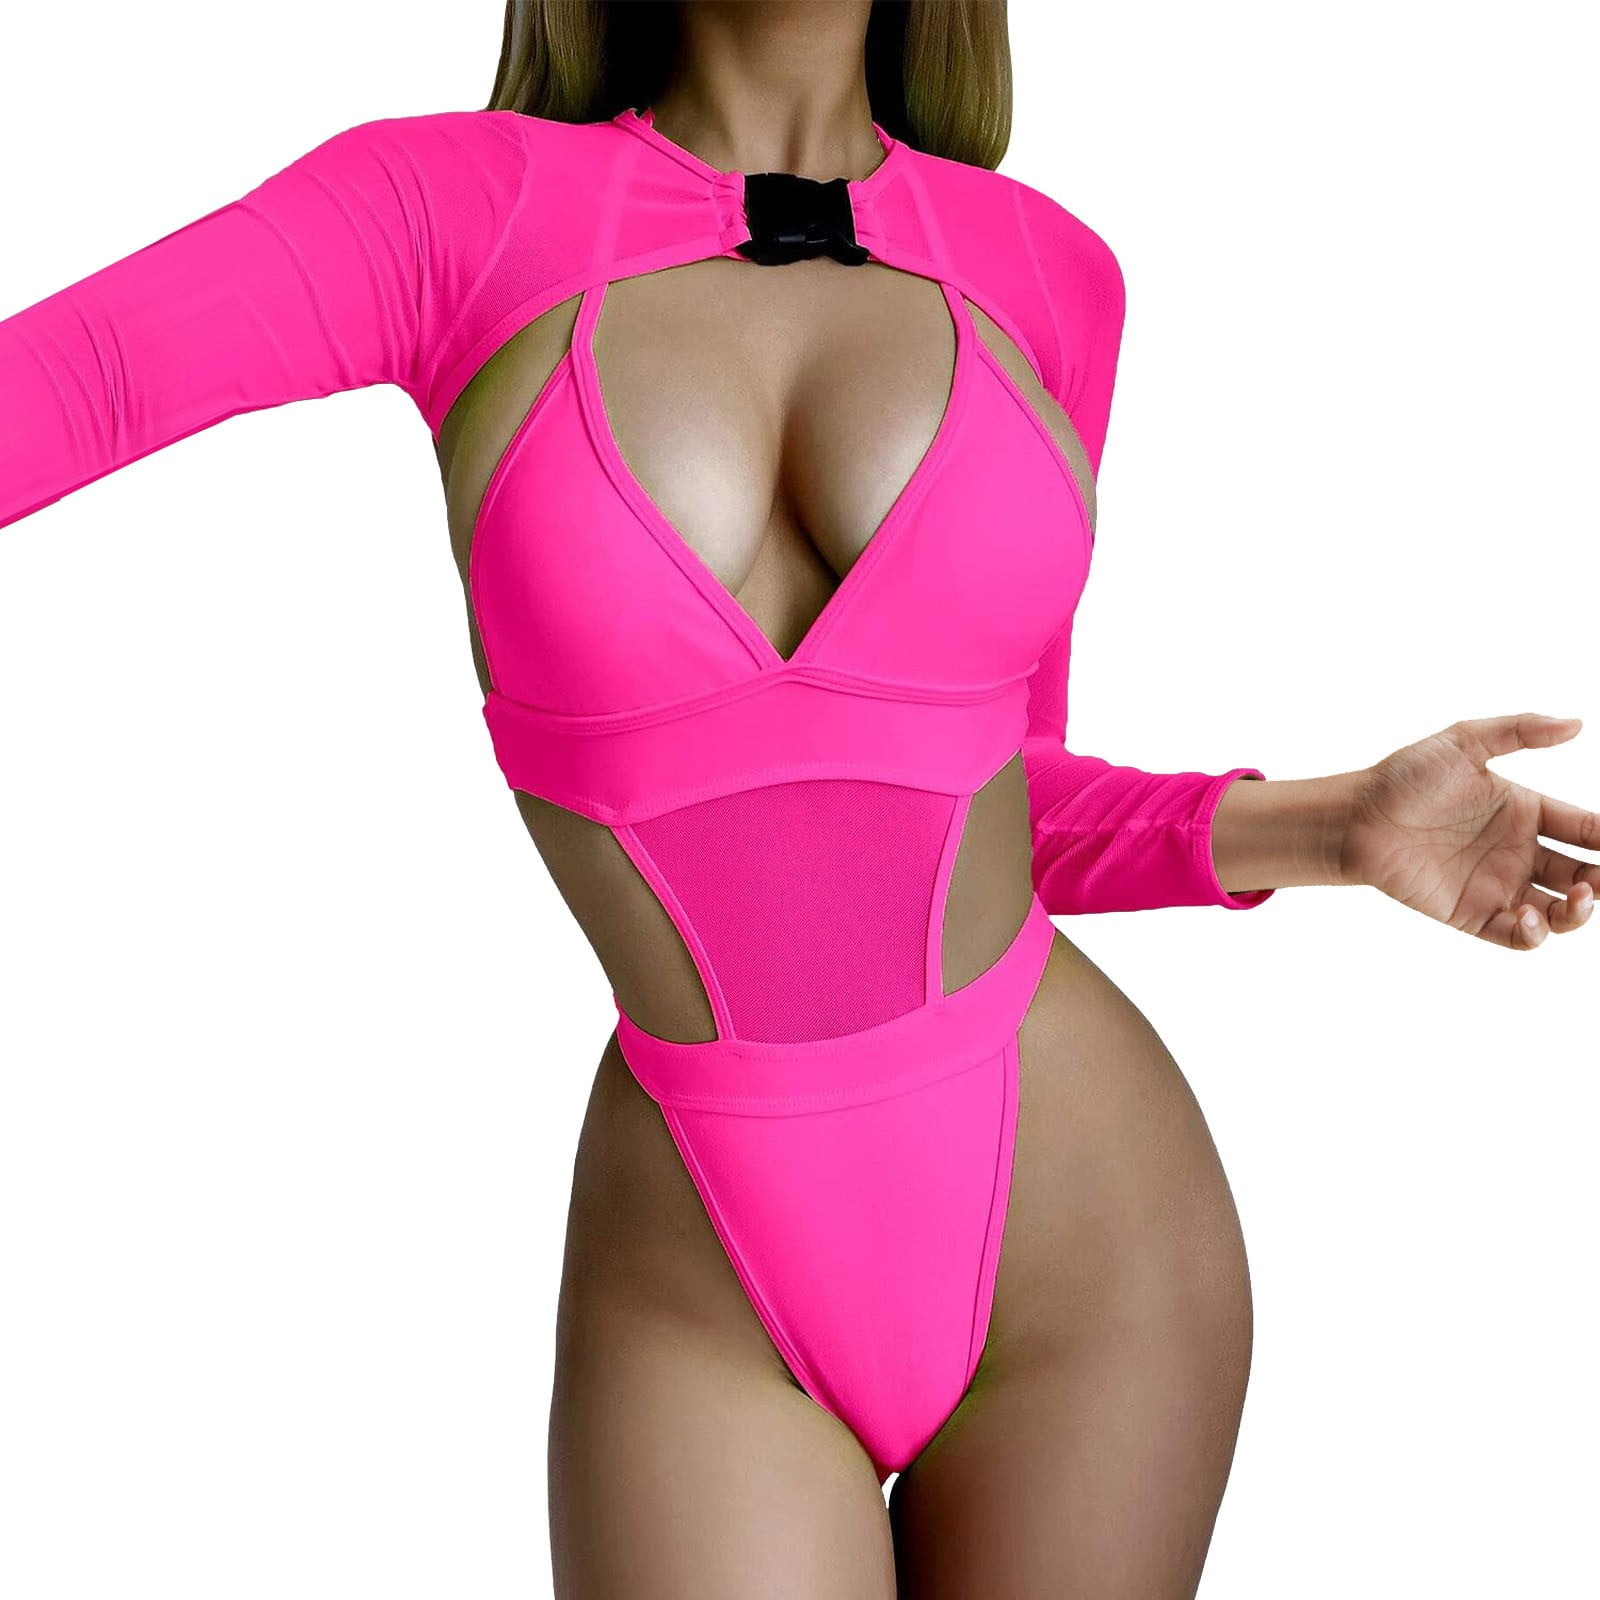 Frehsky lingerie for women 2 Piece Women Rave Outfits Neon Bodysuit Crop  Top Long Sleeve Mesh With Buckle For Festival Club Party Pink 